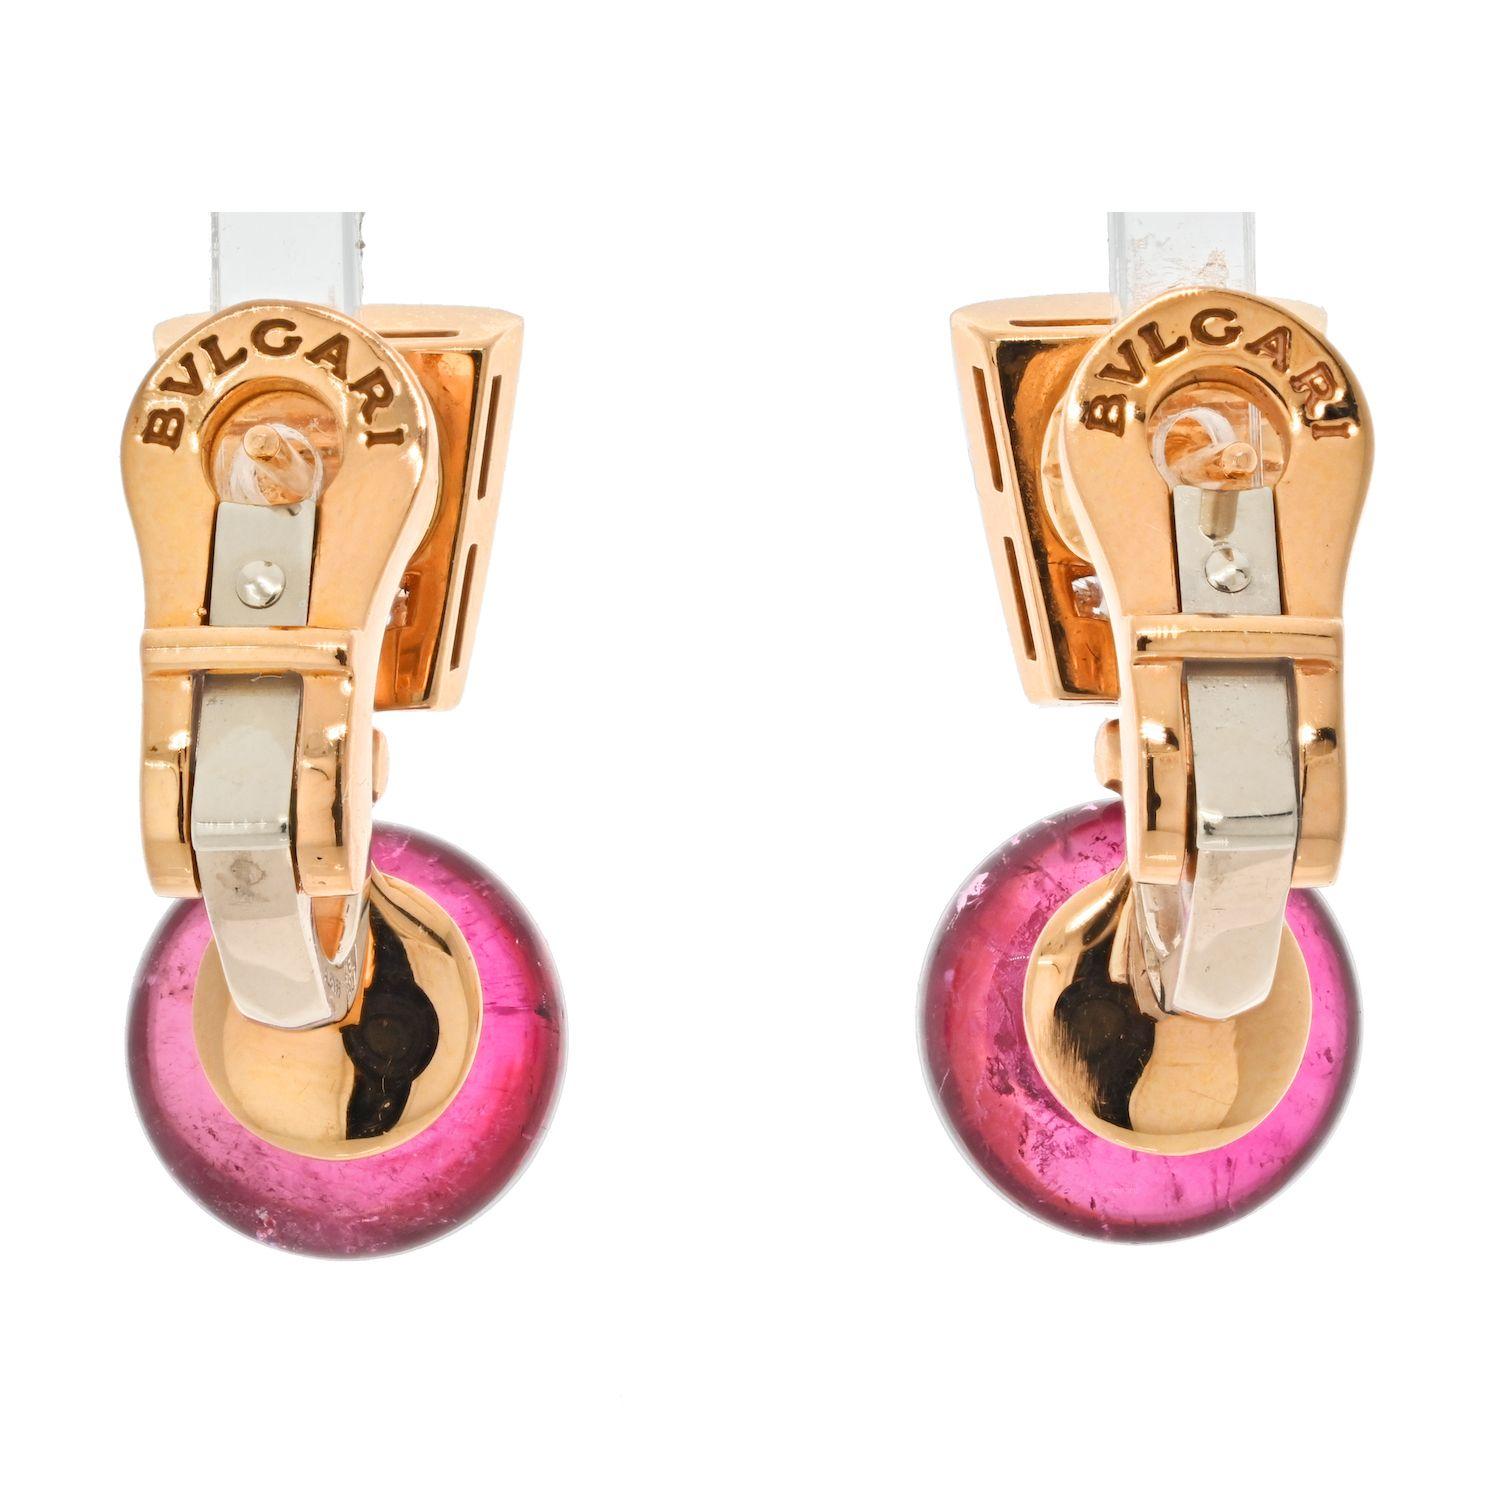 These fabulous Bulgari earrings is crafted in 18k yellow gold and set with cabochon tourmalines and round brilliant-cut D-F VVS1-VVS2 diamonds weighing an estimated 1.25 - 1.30 carats. Made in Italy circa 2000s. Measurements: 0.38